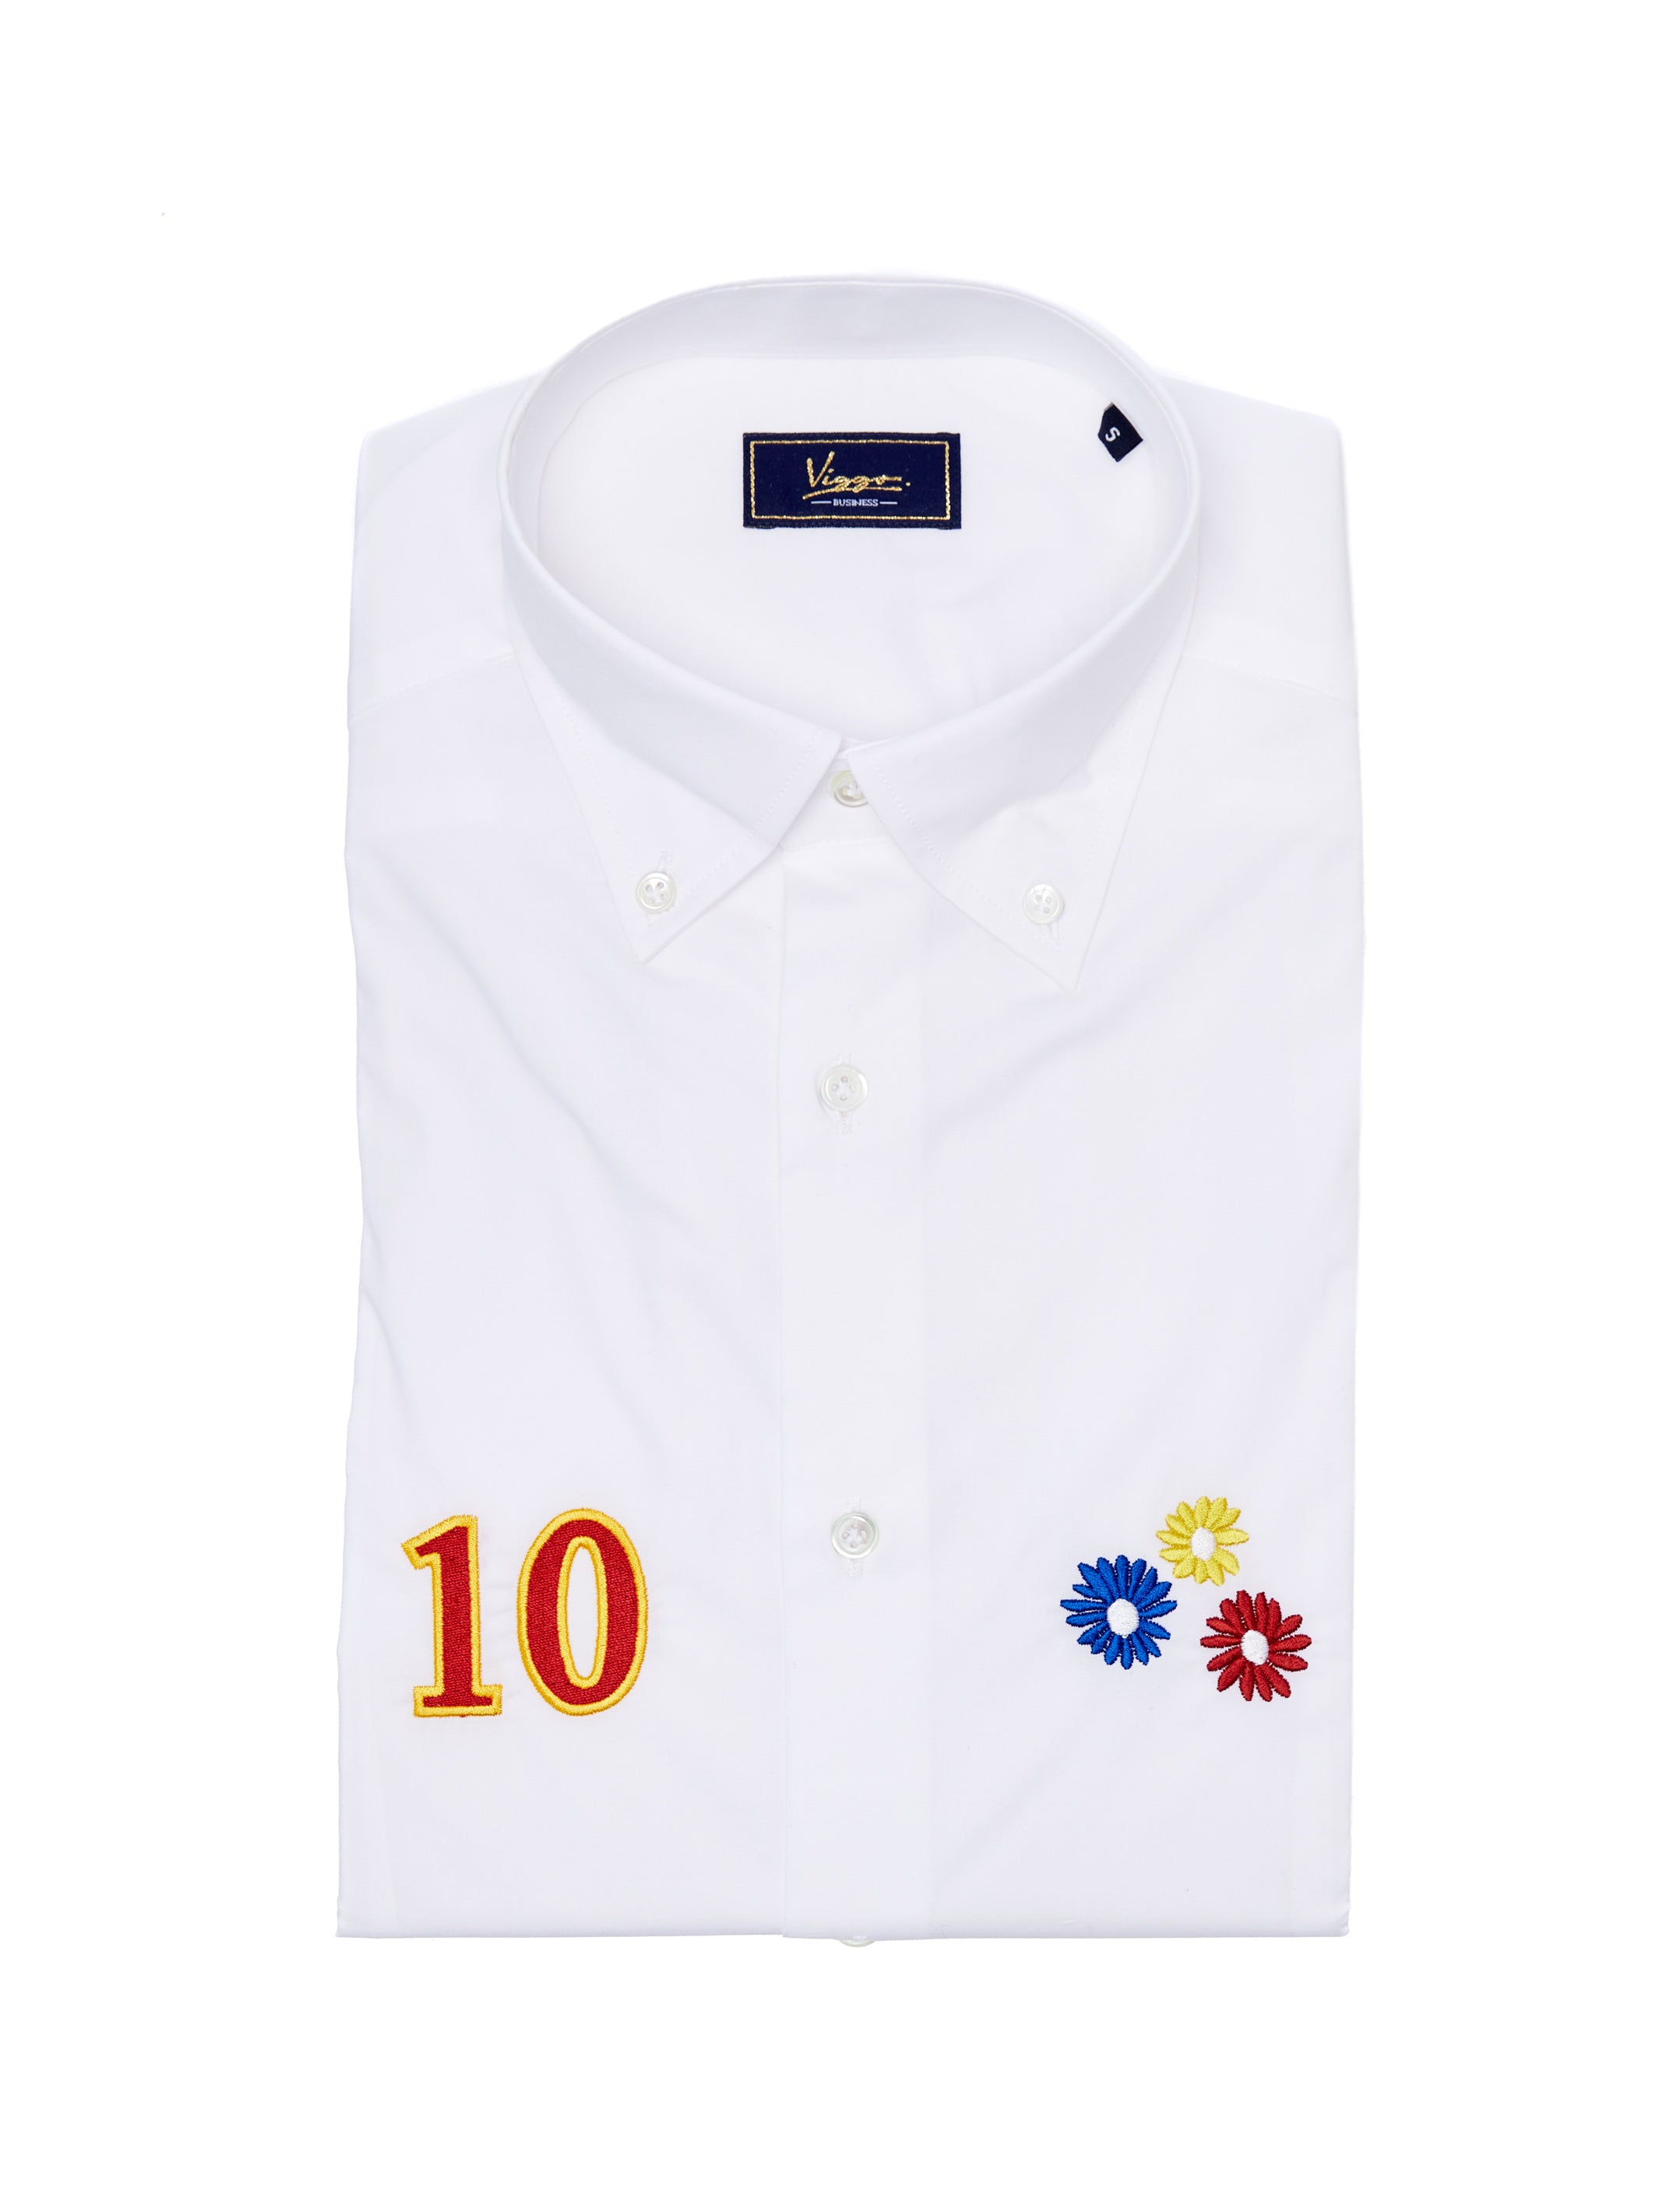 Shirt no. 10 with embroidered popcorn